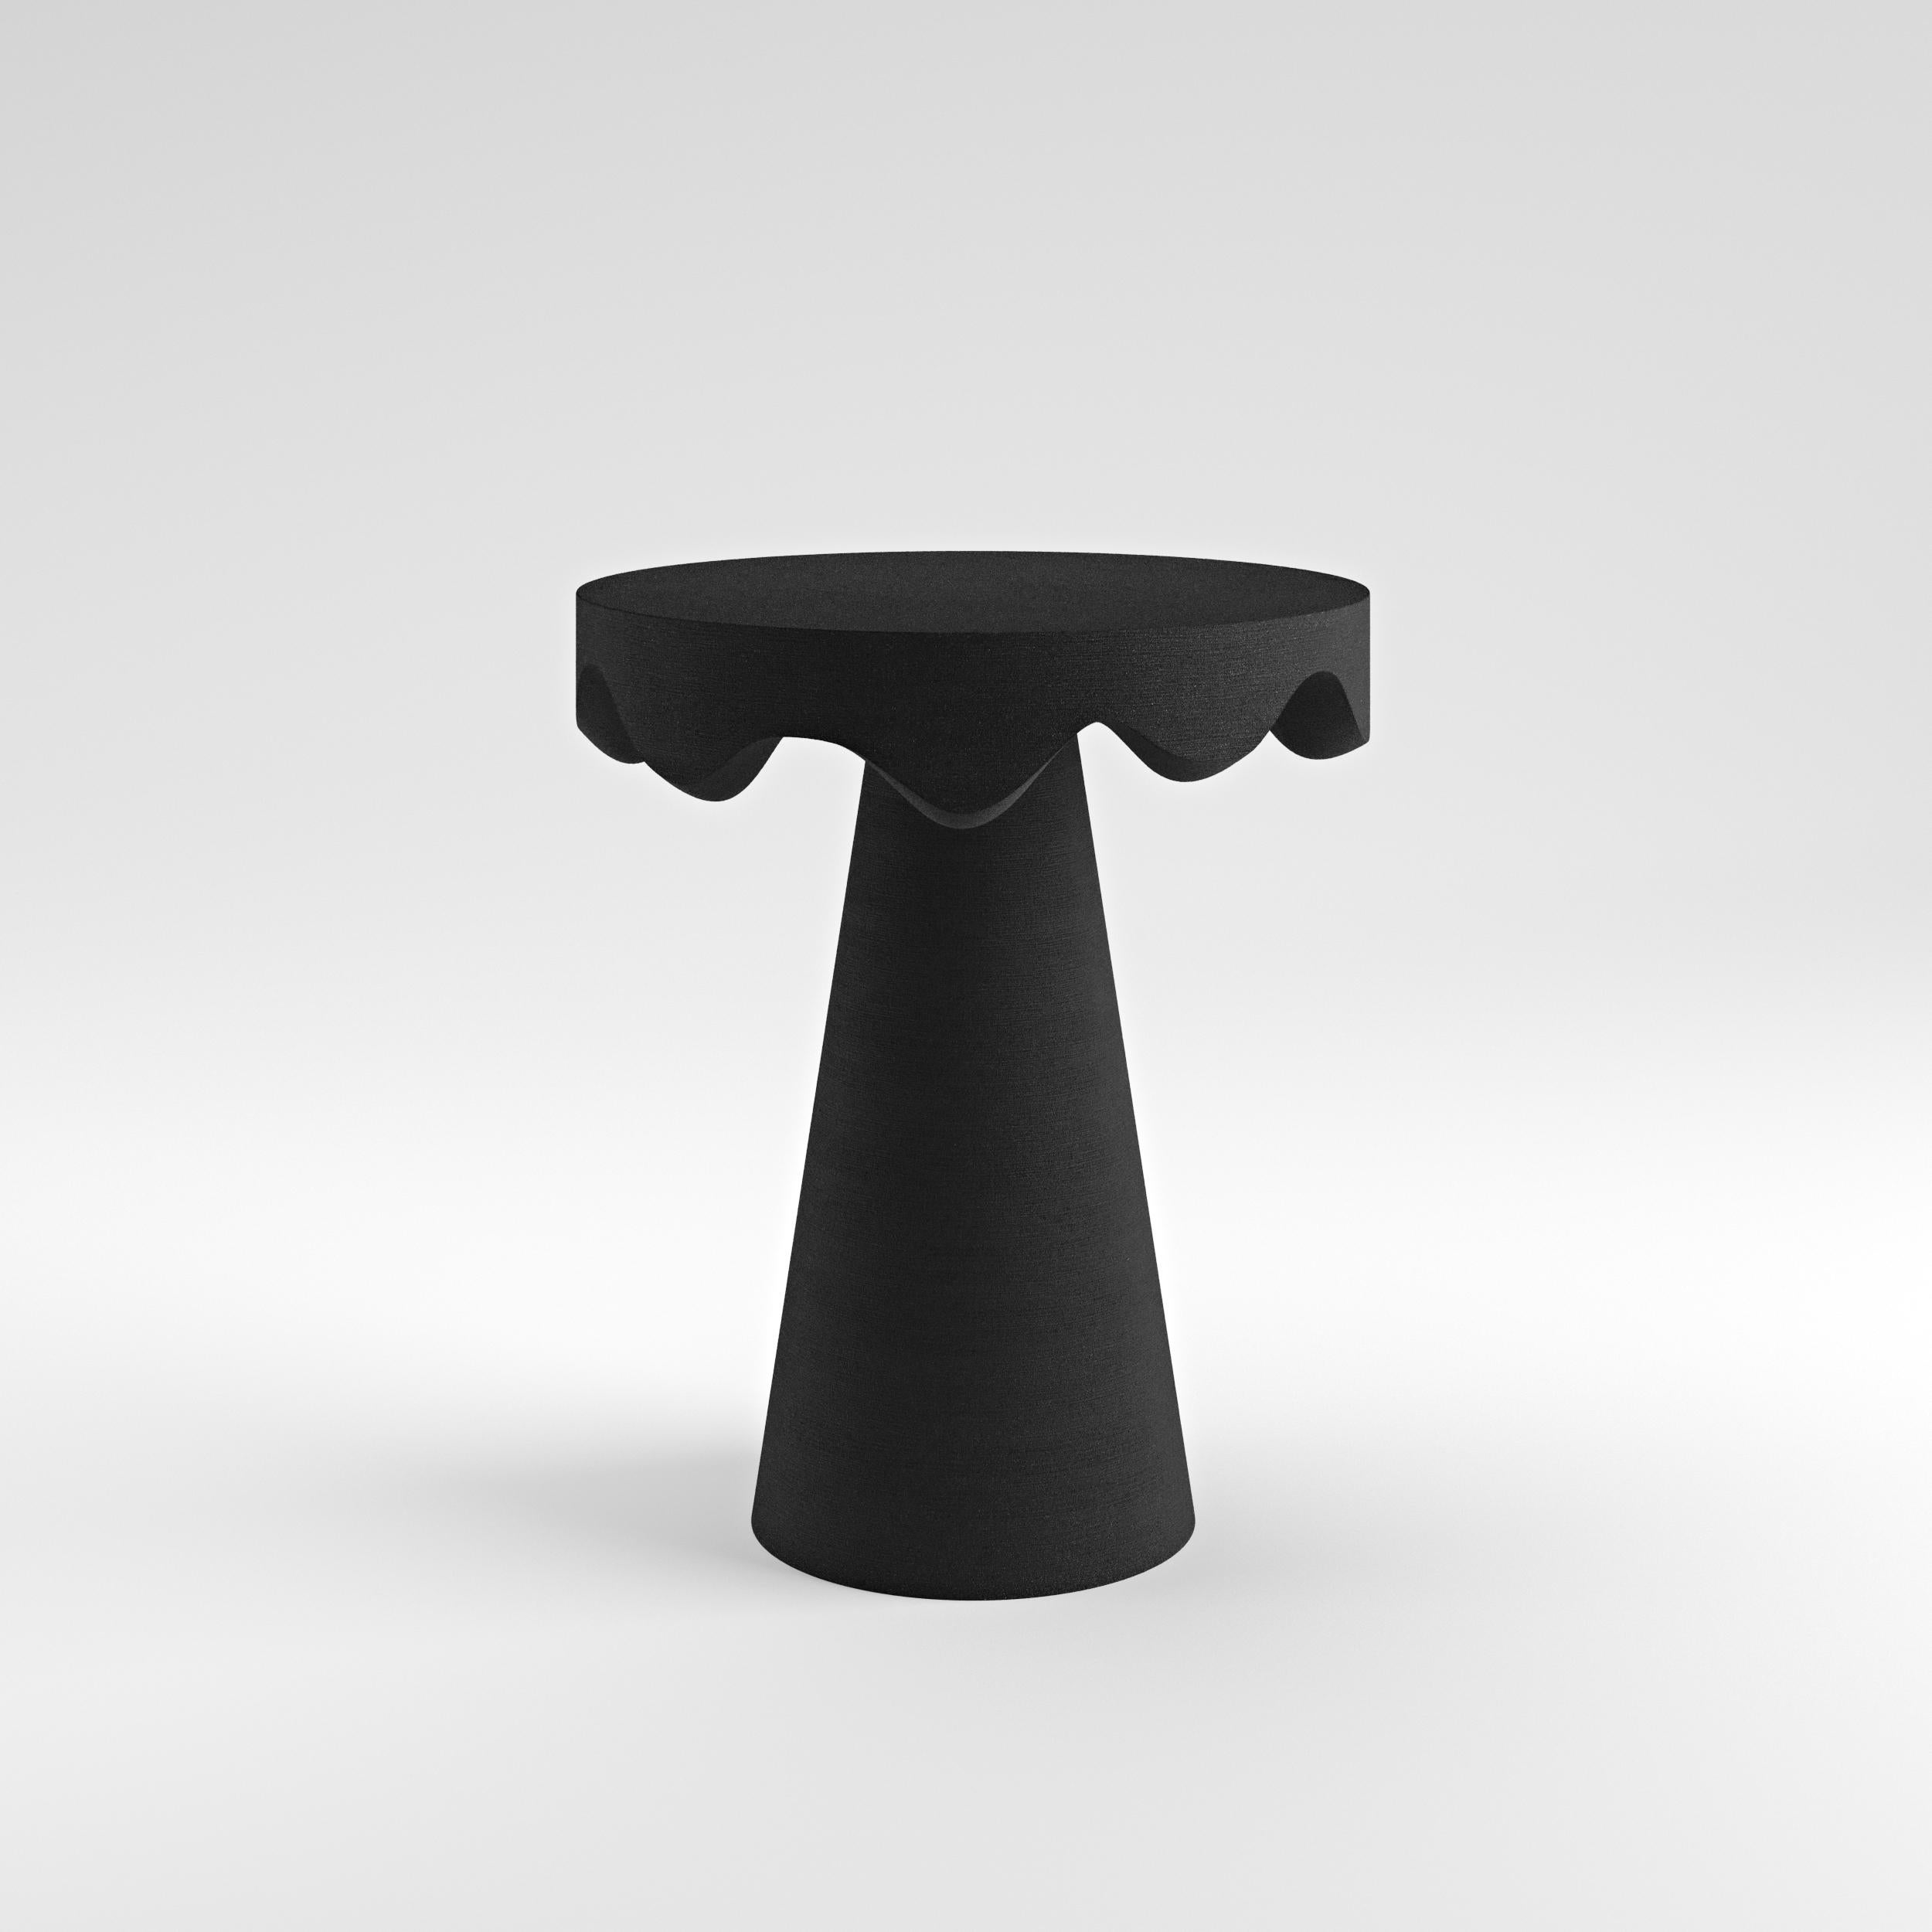 Made-to-order
Dripotlé quartz sand
Side table by T. Woon

The exquisite side table, created using innovative 3D printing technology with quartz sand, is a testament to the designer's pristine aesthetics. Its captivating and curious appearance